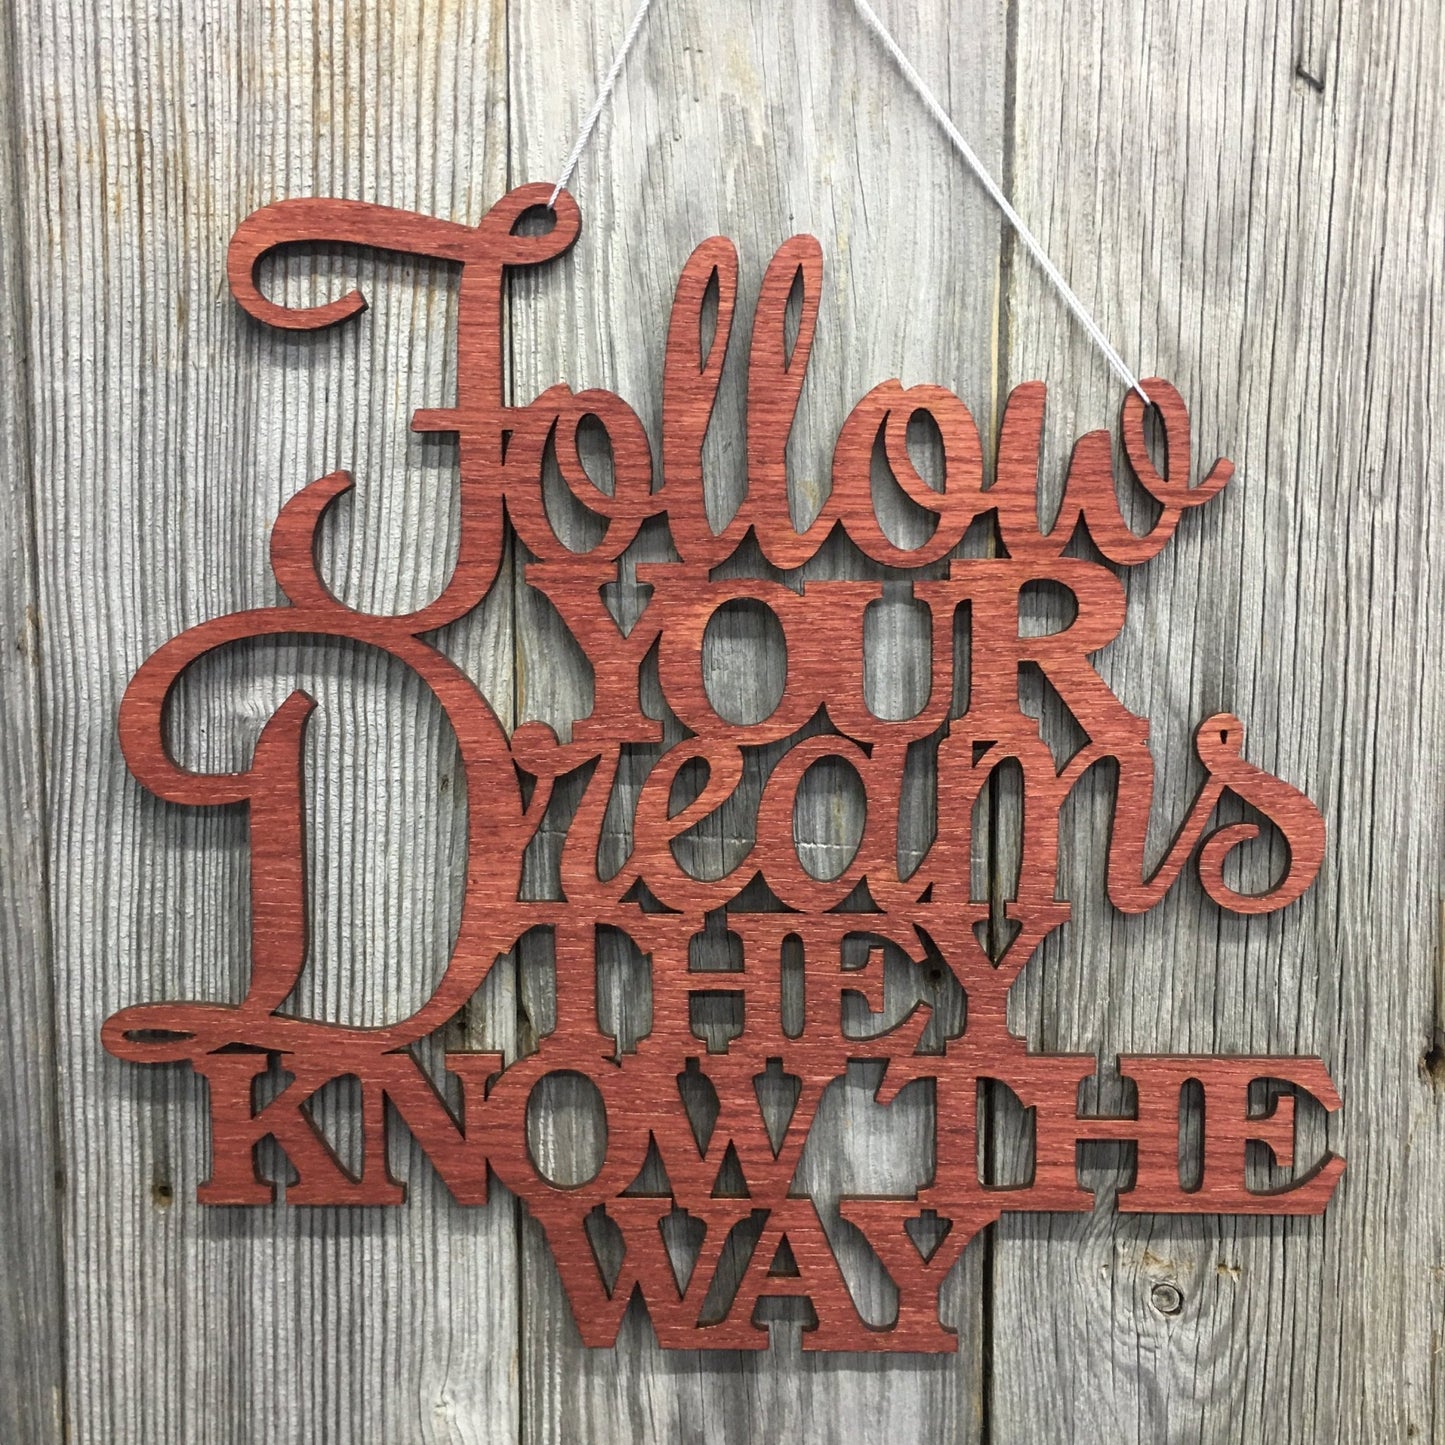 Custom Sign Wall Decor - Custom Sign Wall Decor - Follow Your Dreams Sign Wall Decor - Legacy Images - Legacy Images - Novelty Signs - Legacy Images - Novelty Signs